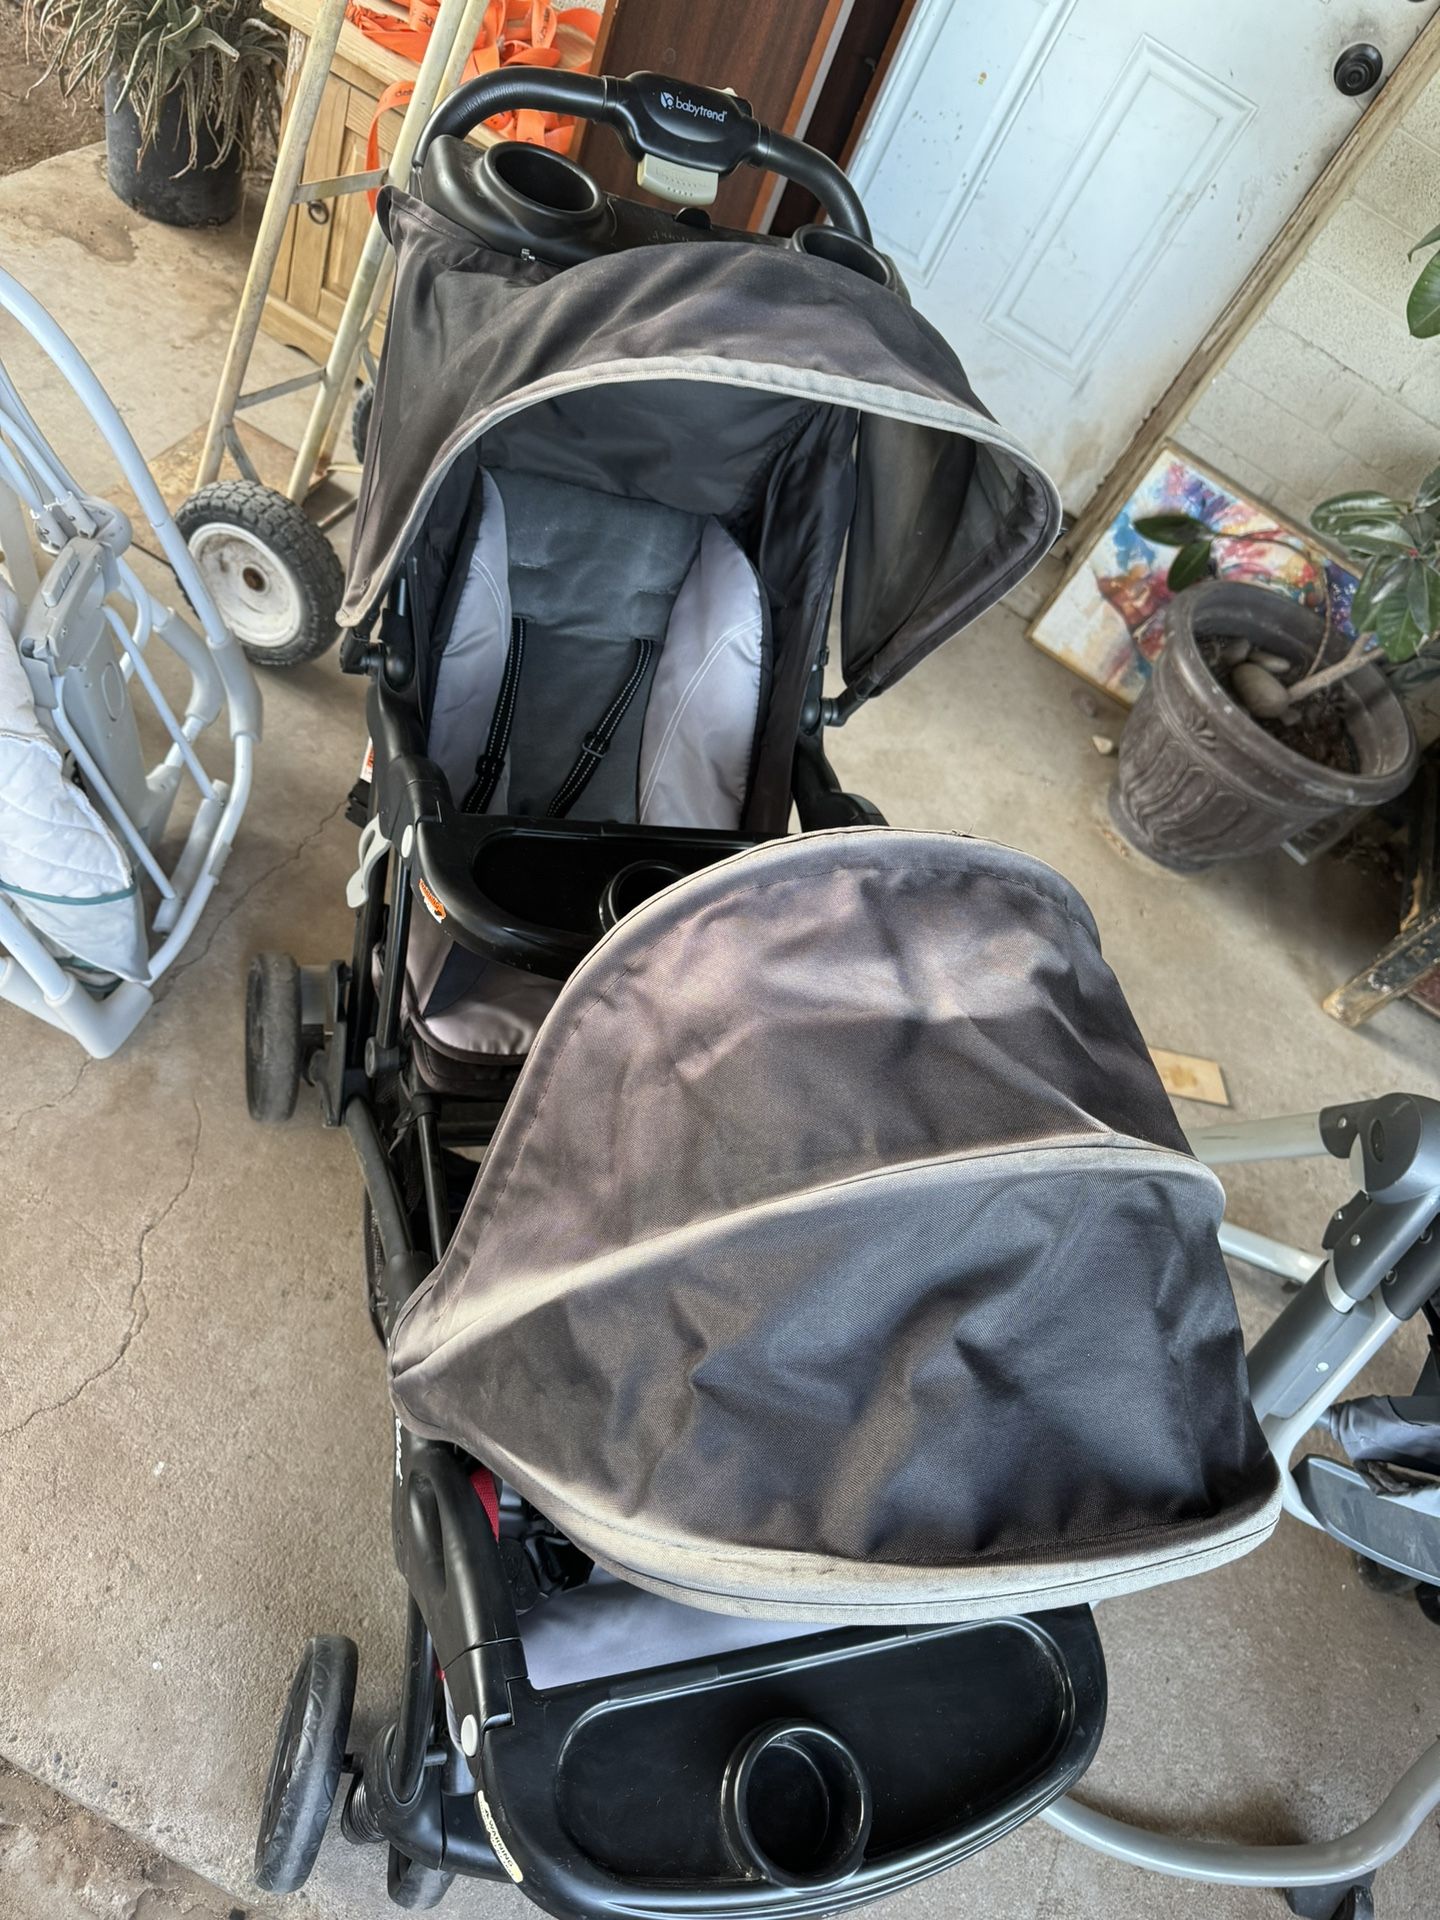 Babytrend  Sit N Stand Double Stroller 